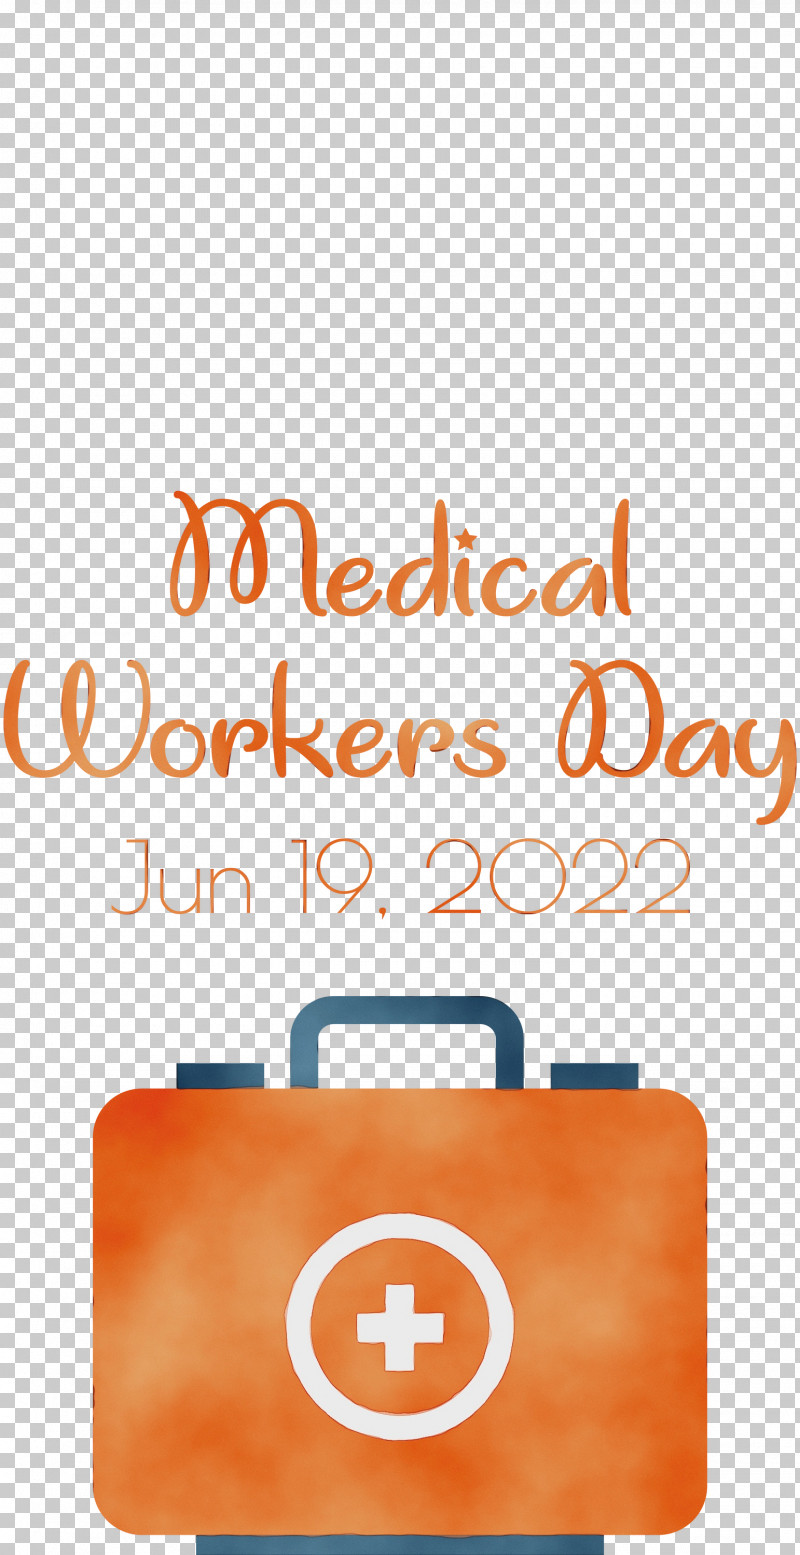 Line Font Meter Geometry Mathematics PNG, Clipart, Geometry, Line, Mathematics, Medical Workers Day, Meter Free PNG Download